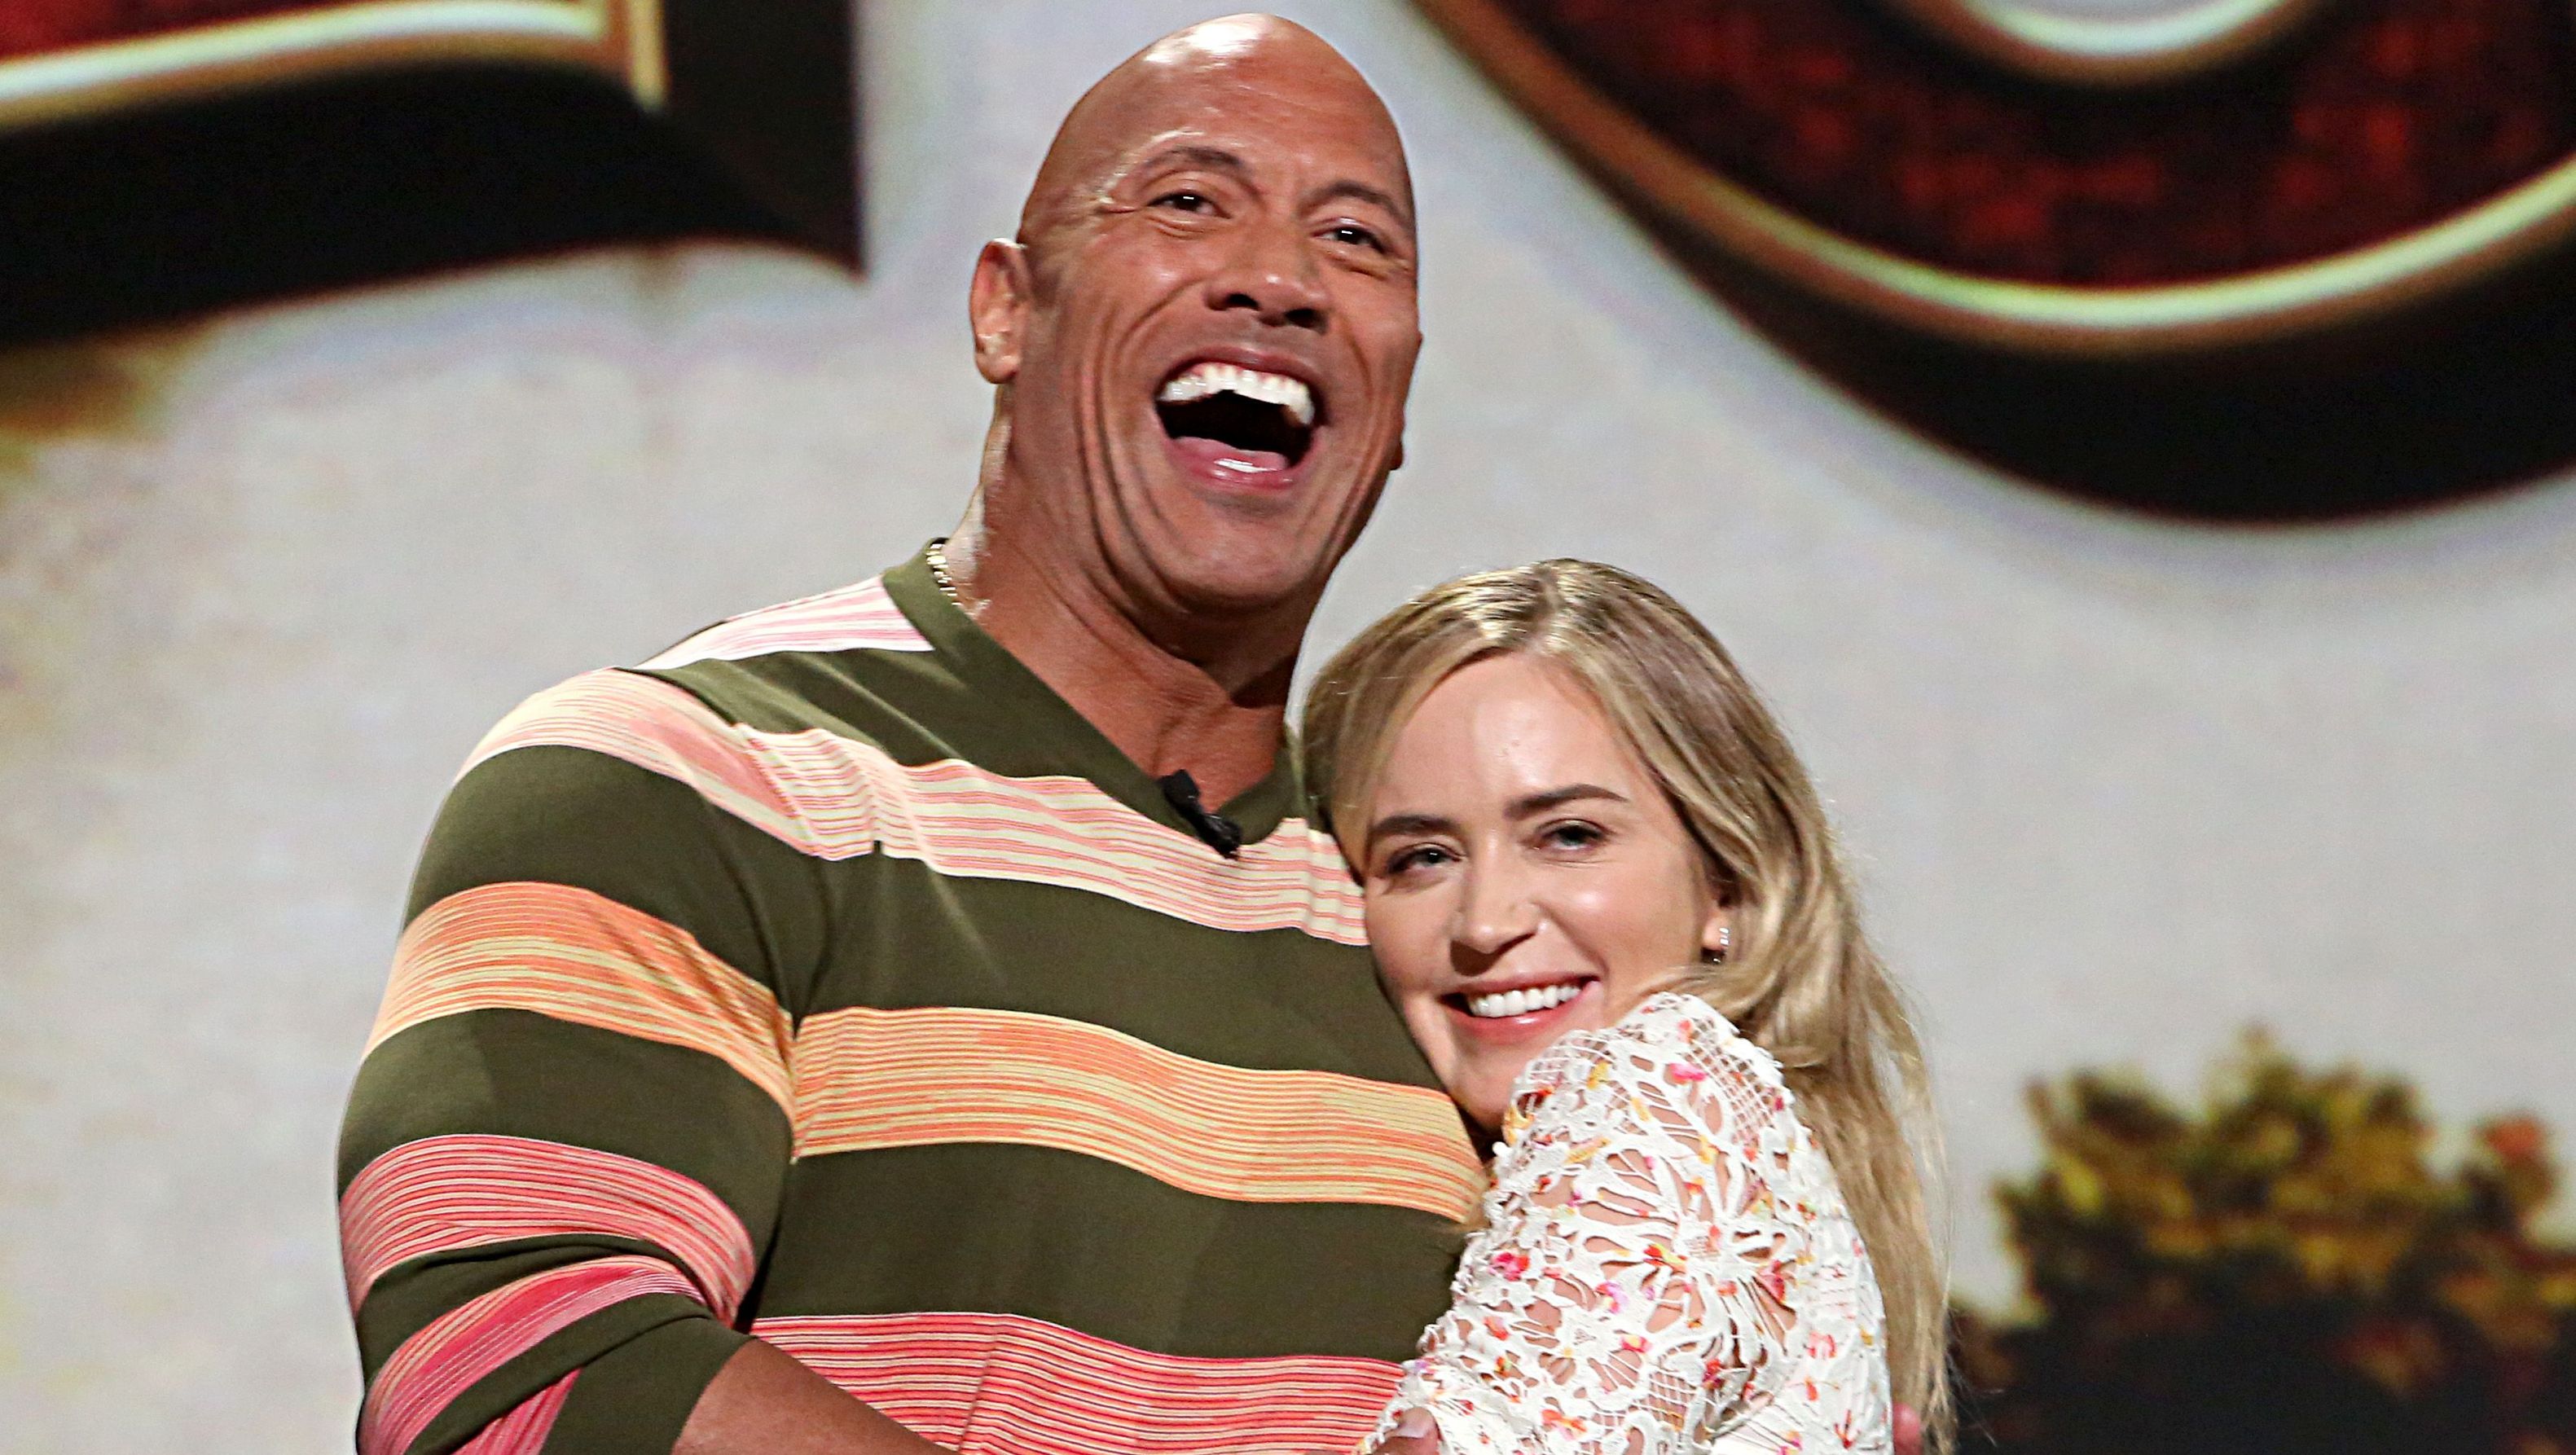 Dwayne 'The Rock' Johnson laughs as Emily Blunt gives him a hug.